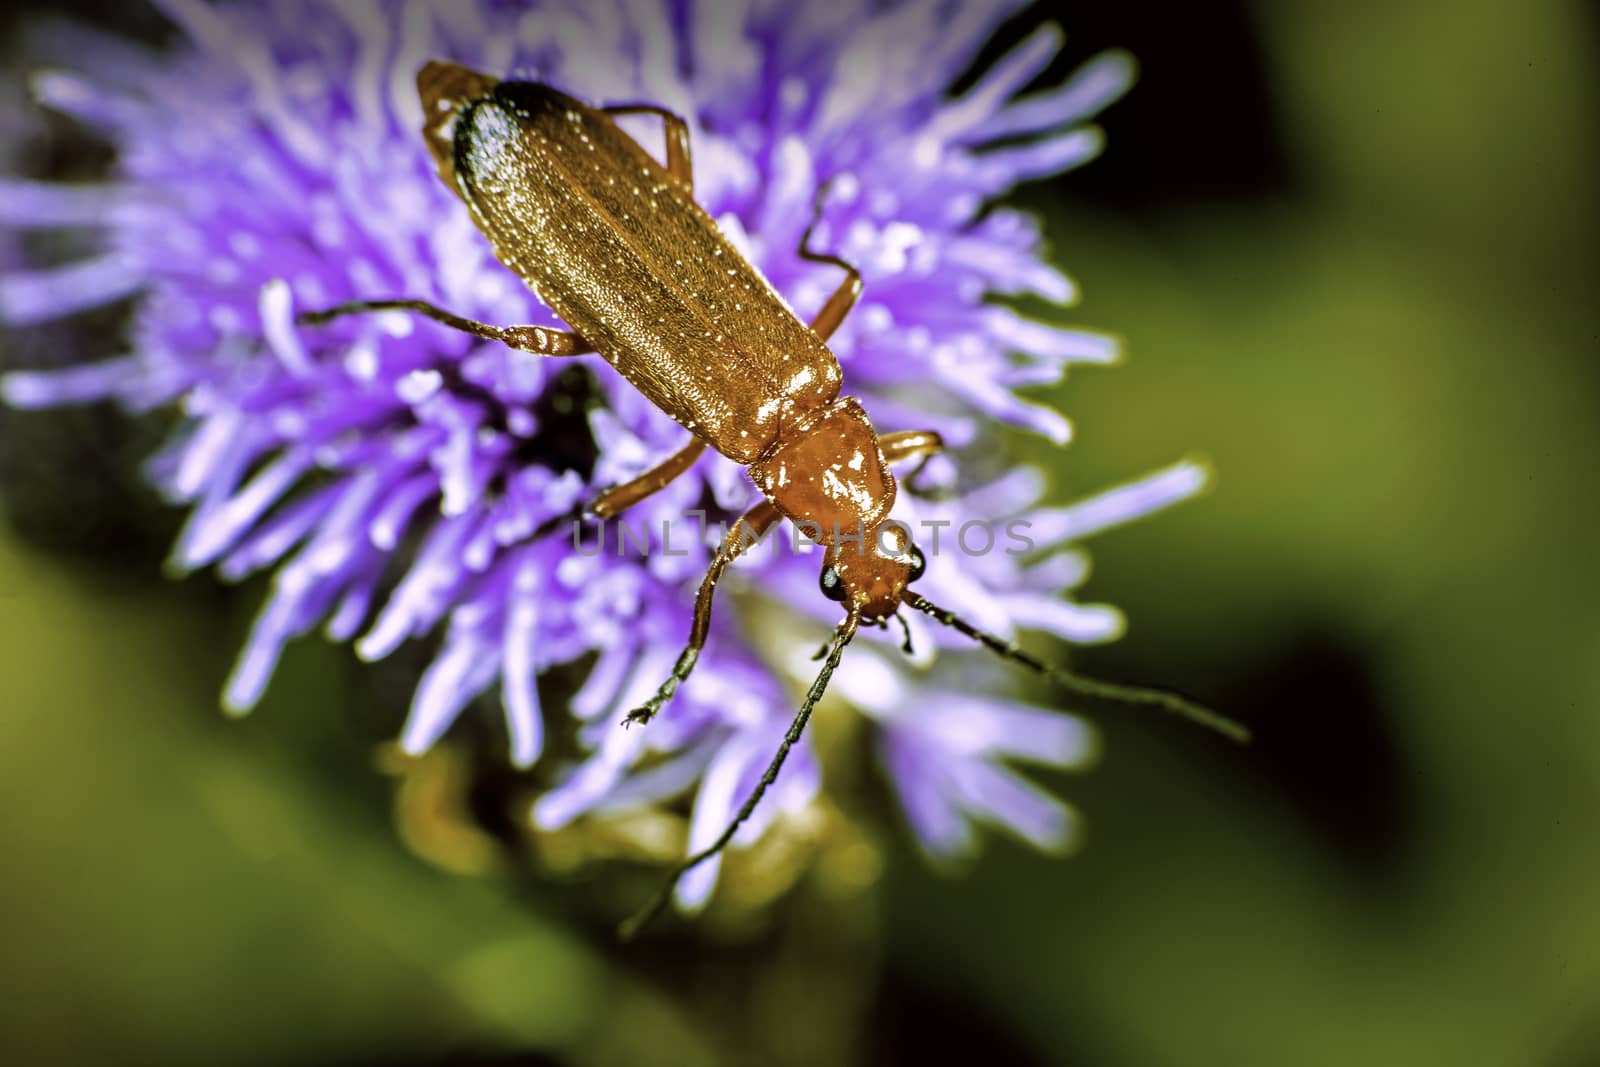 comon red soldier beetle on a flower